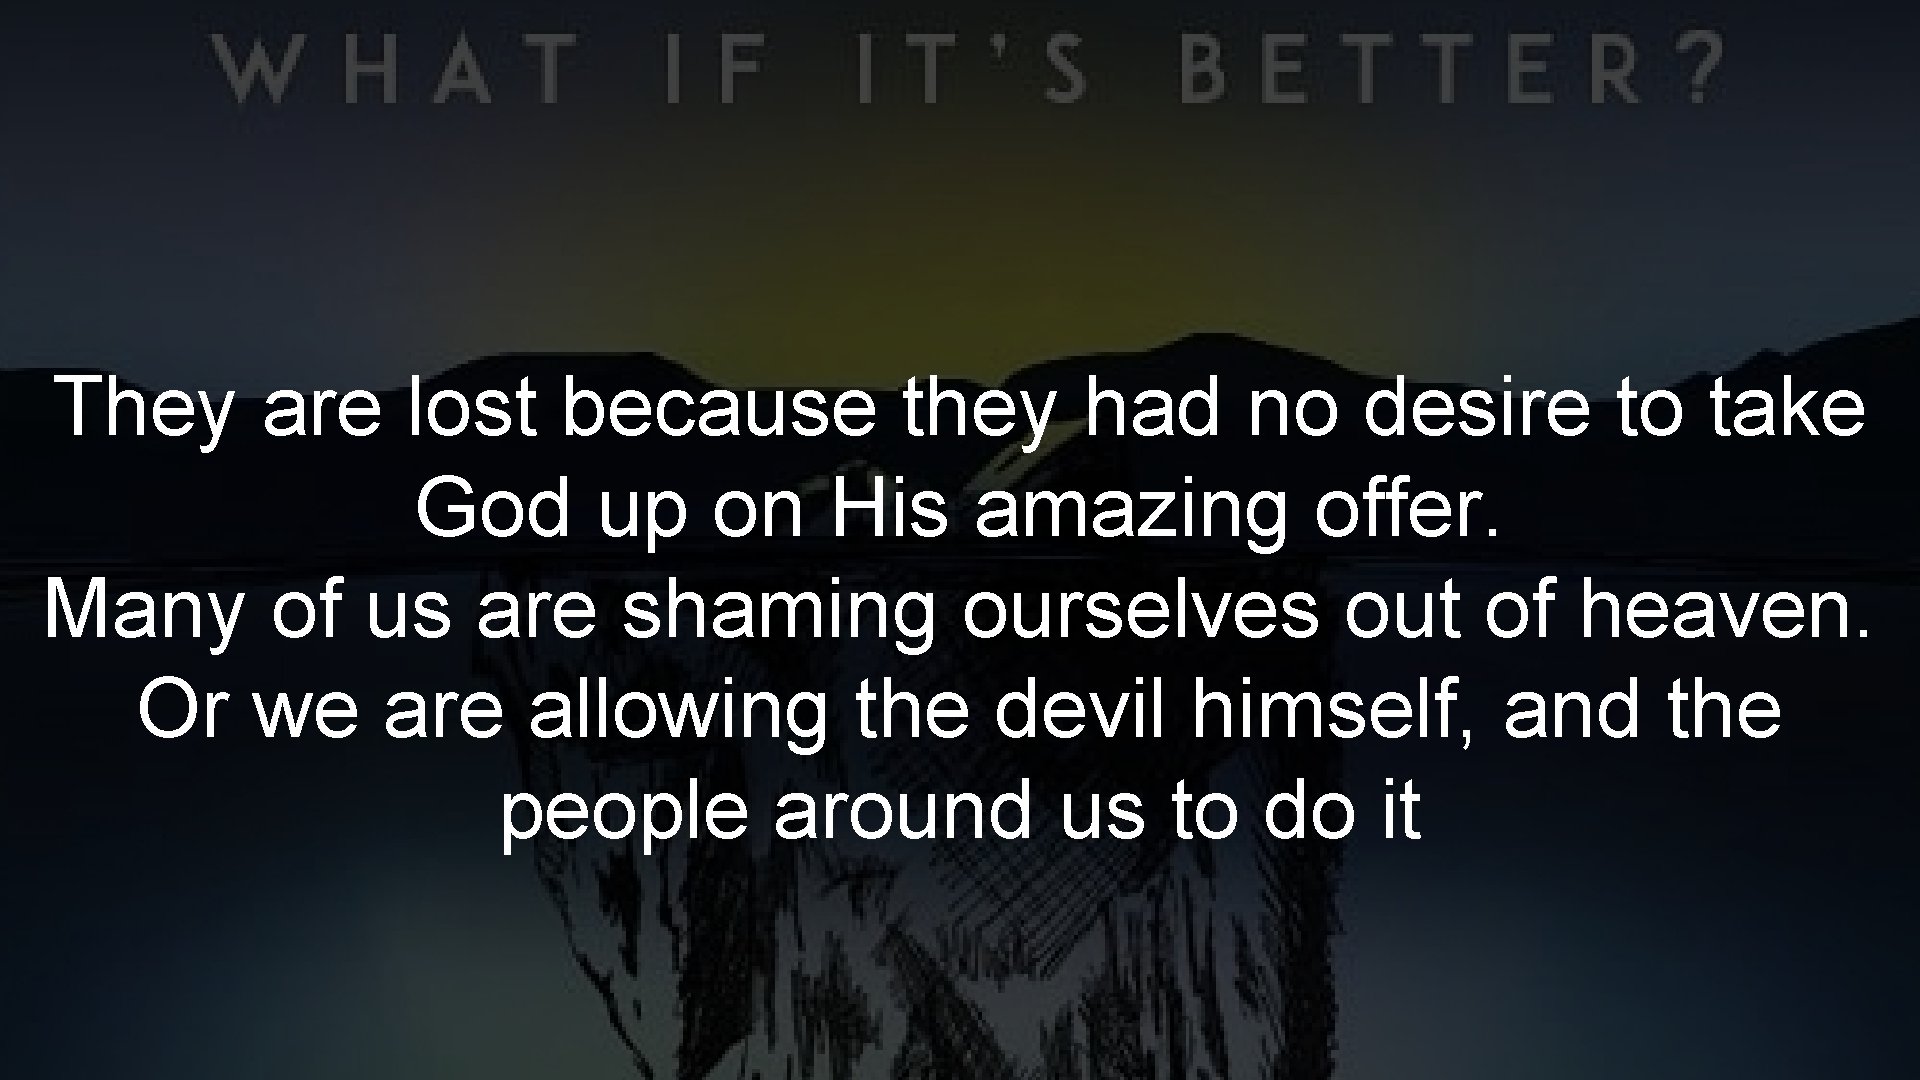 They are lost because they had no desire to take God up on His